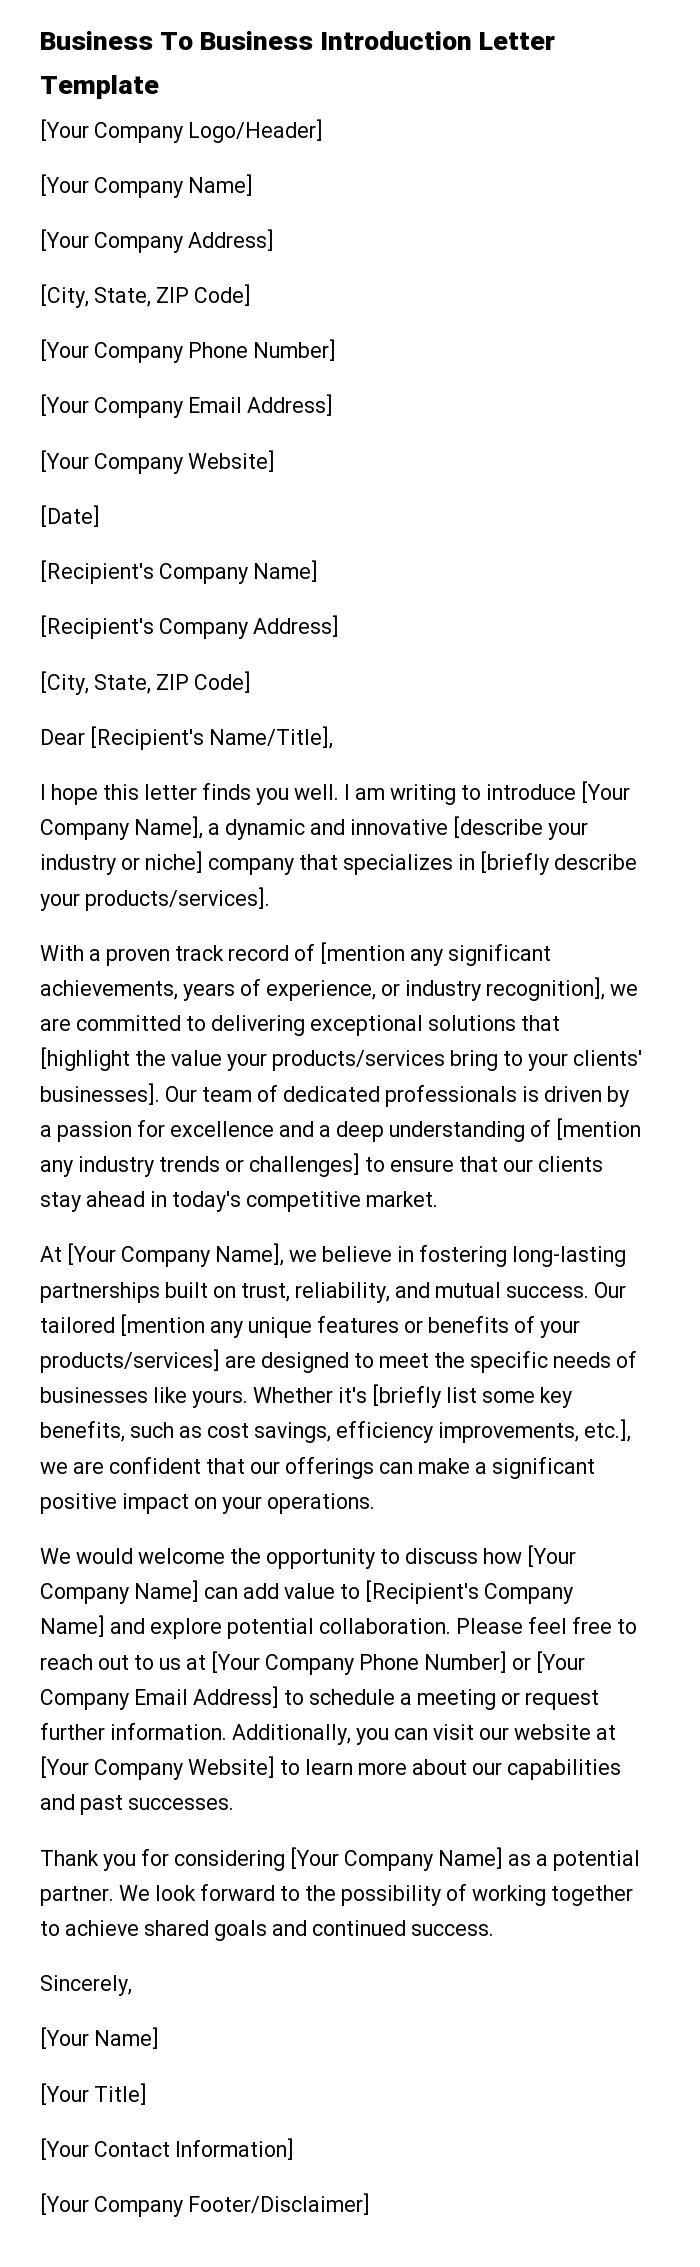 Business To Business Introduction Letter Template